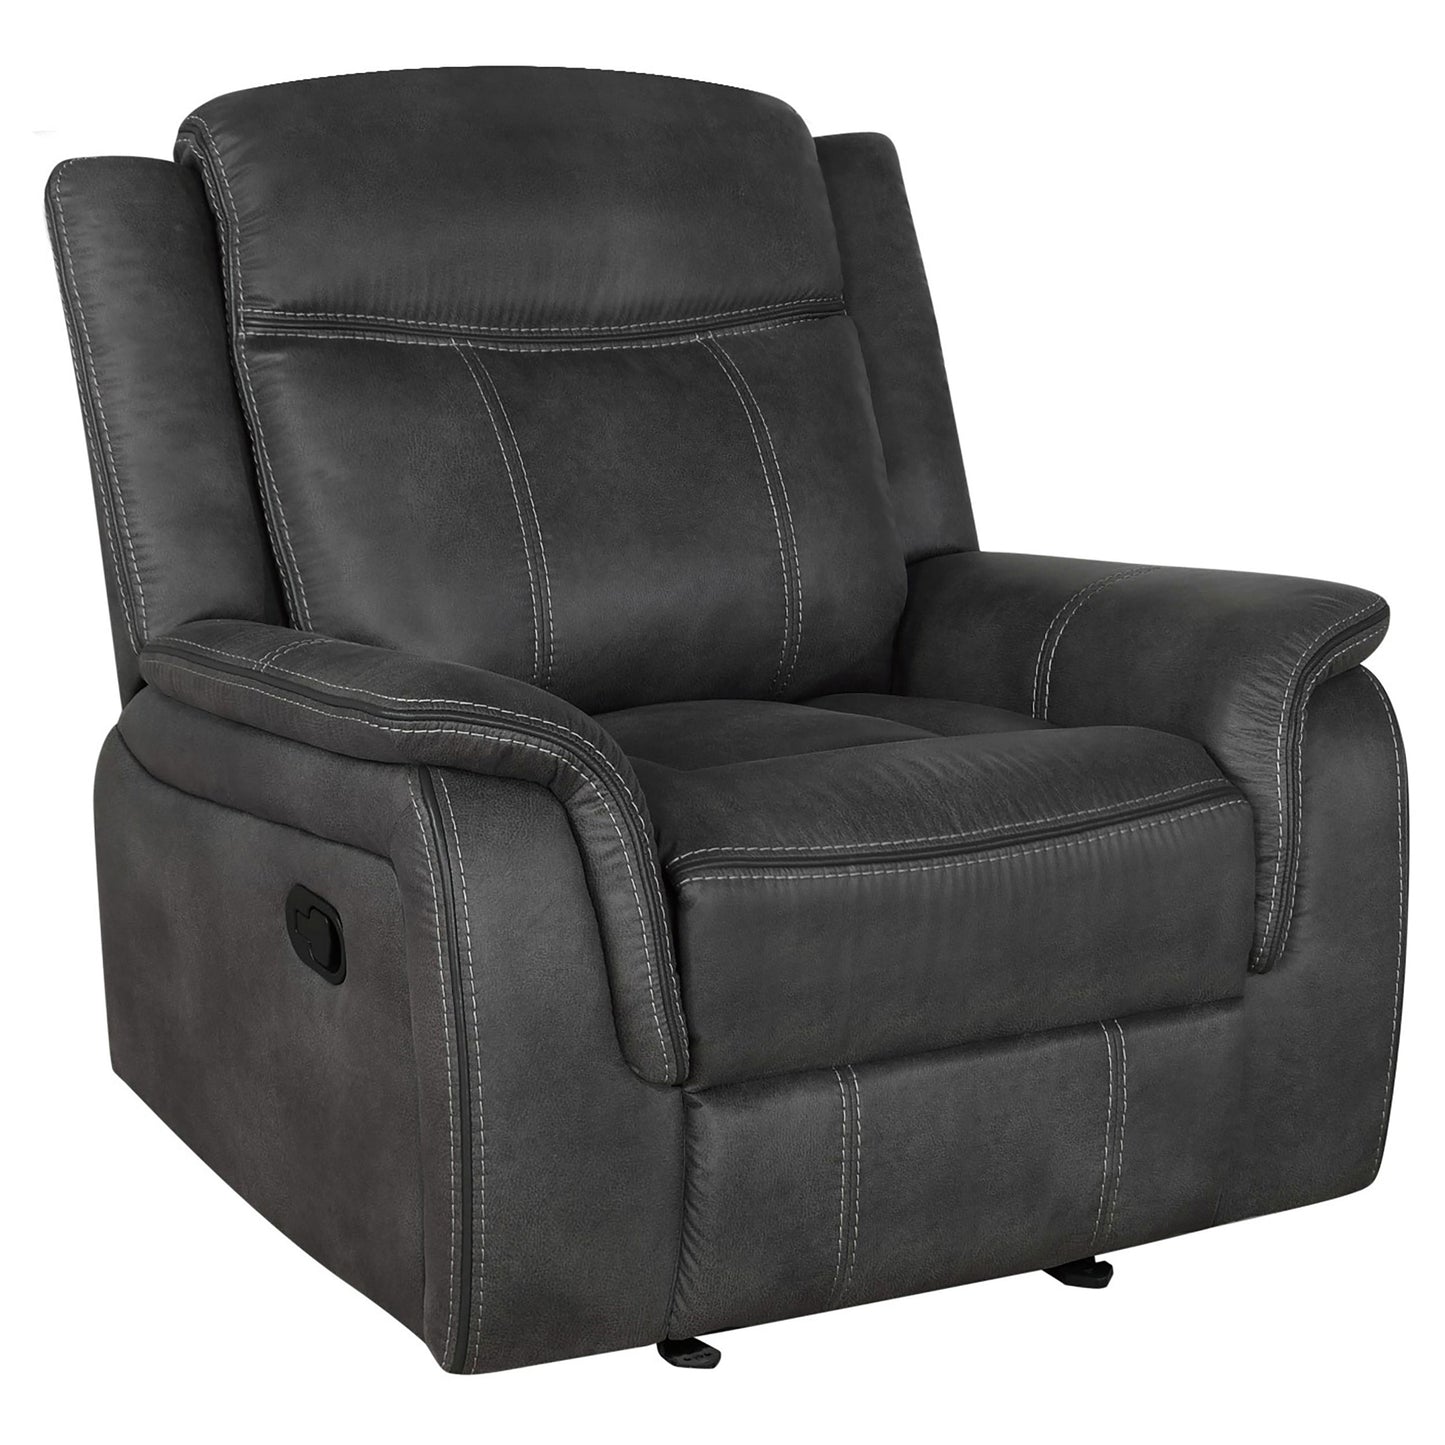 Lawrence Upholstered Padded Arm Glider Recliner Charcoal